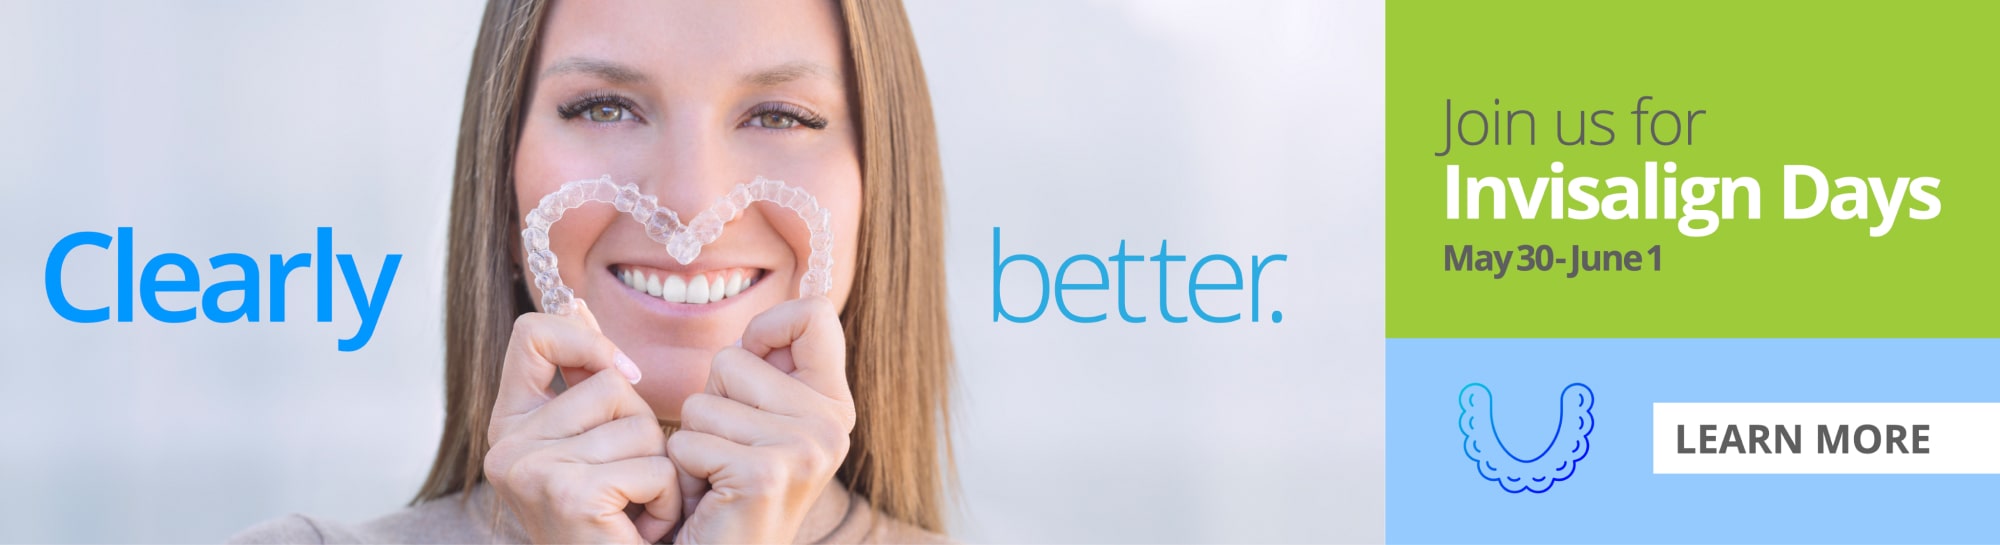 clear aligner day promotion - May 30 - june 1 - learn more